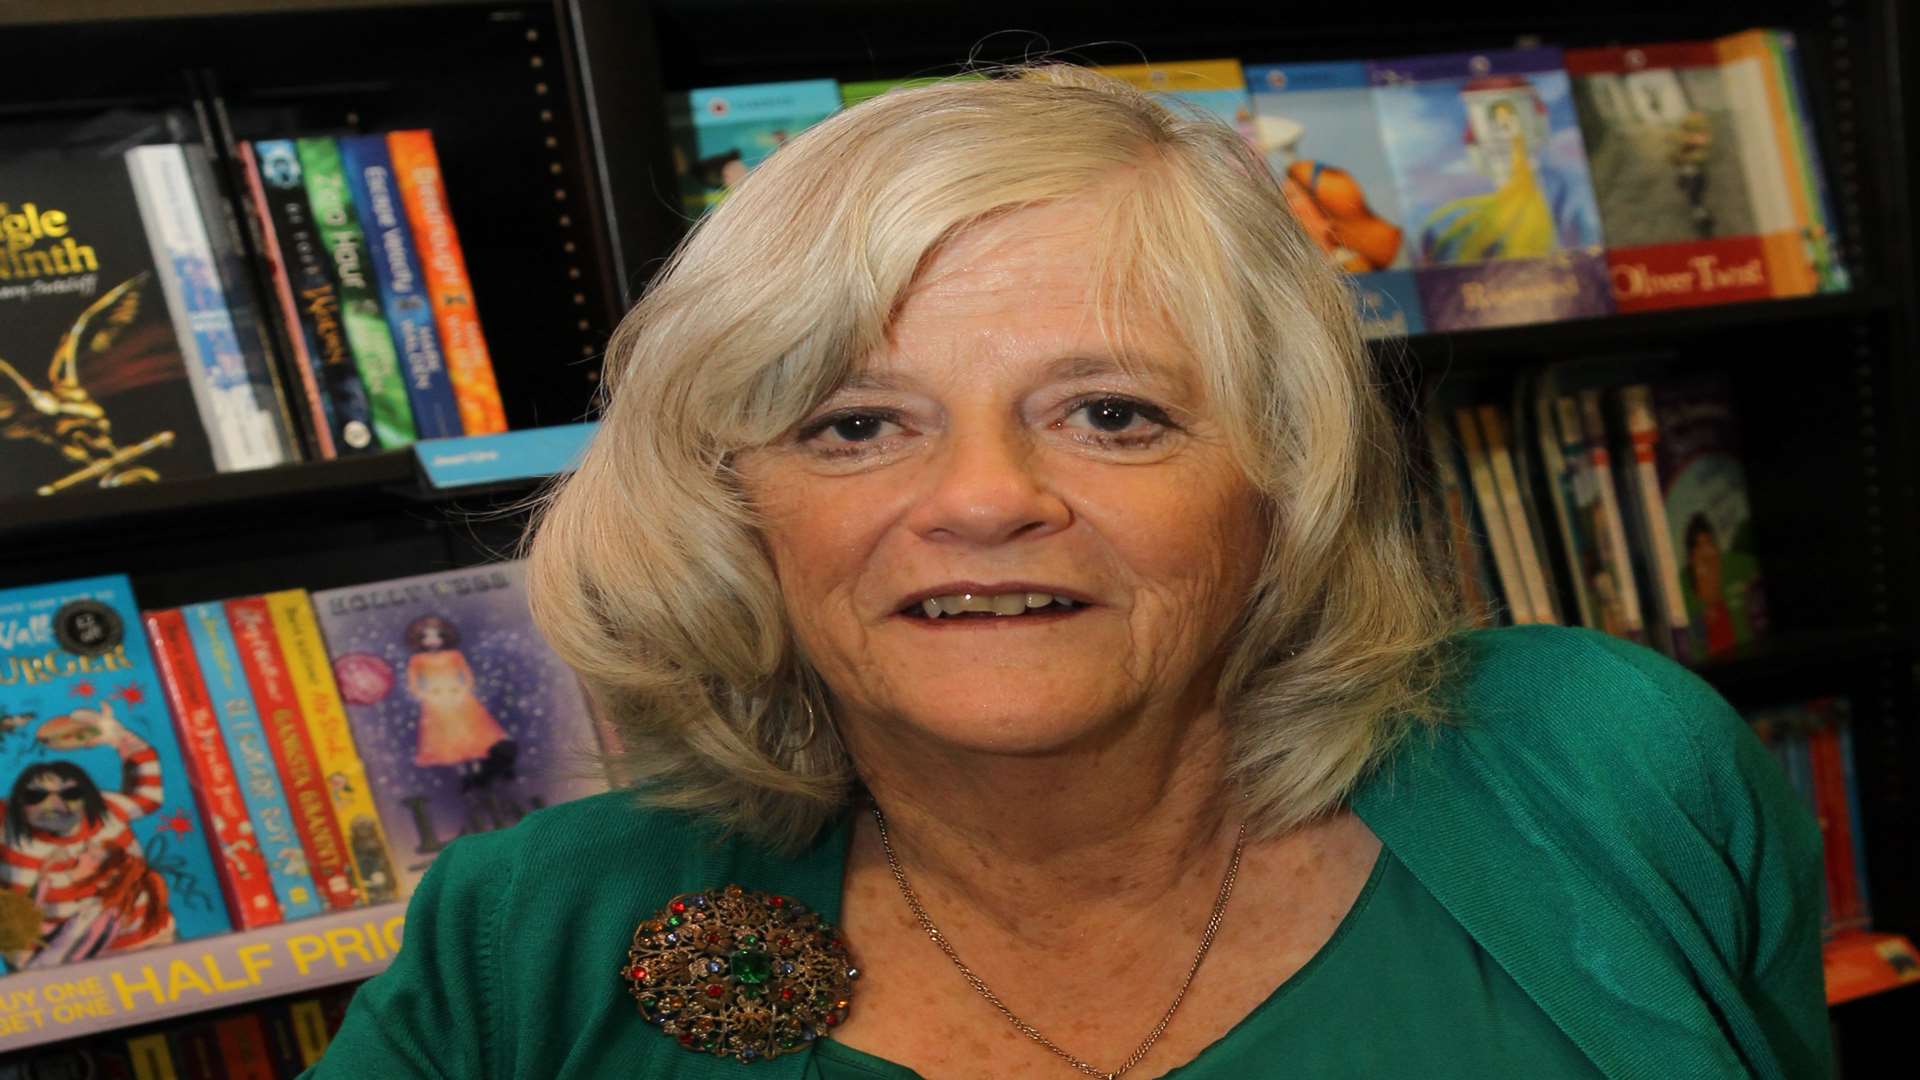 Ann Widdecombe at a recent book signing